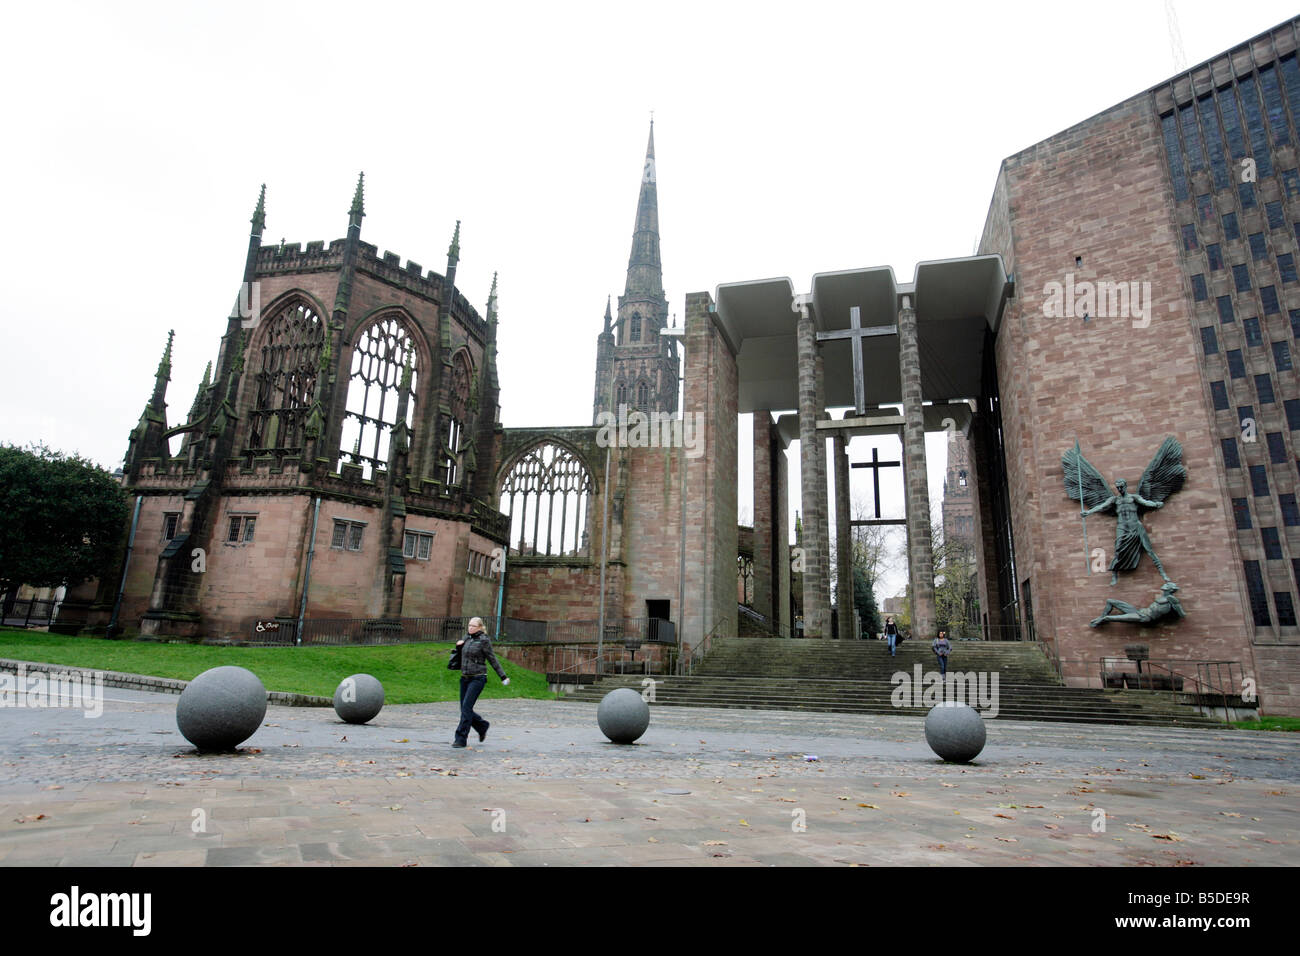 Coventry Kathedrale in Coventry, UK Stockfoto